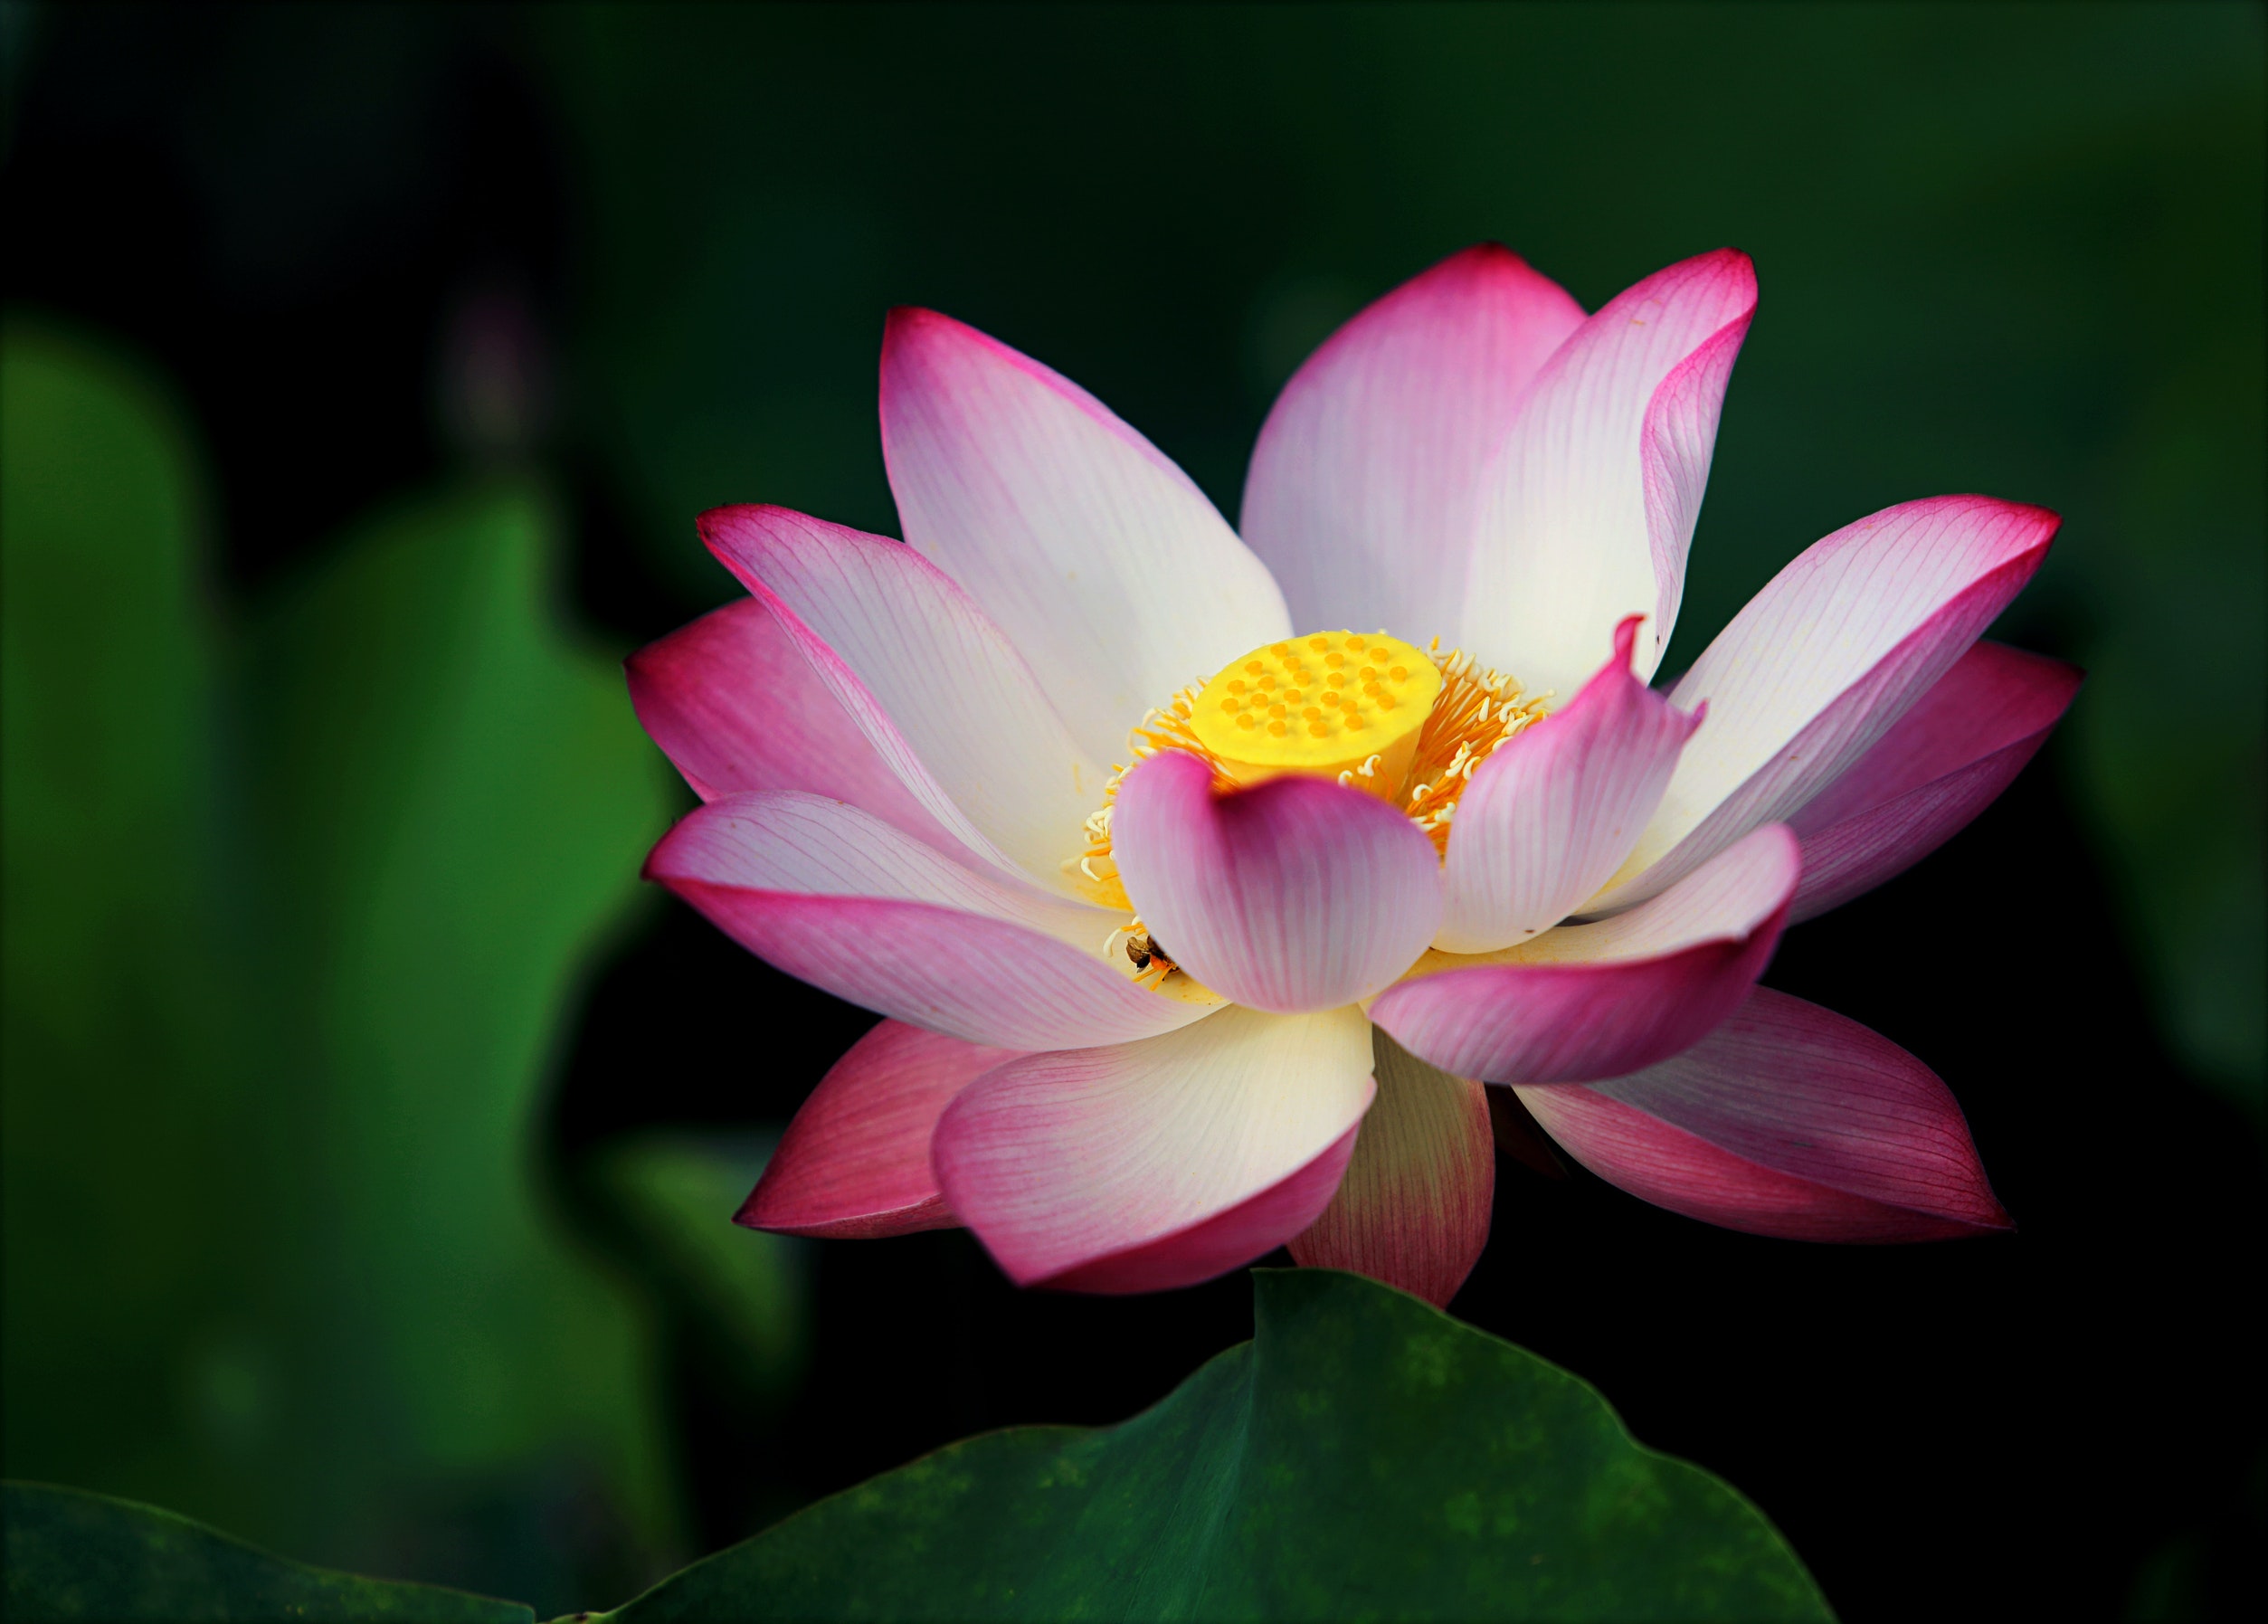 a lotus flower surrounded by green leaves